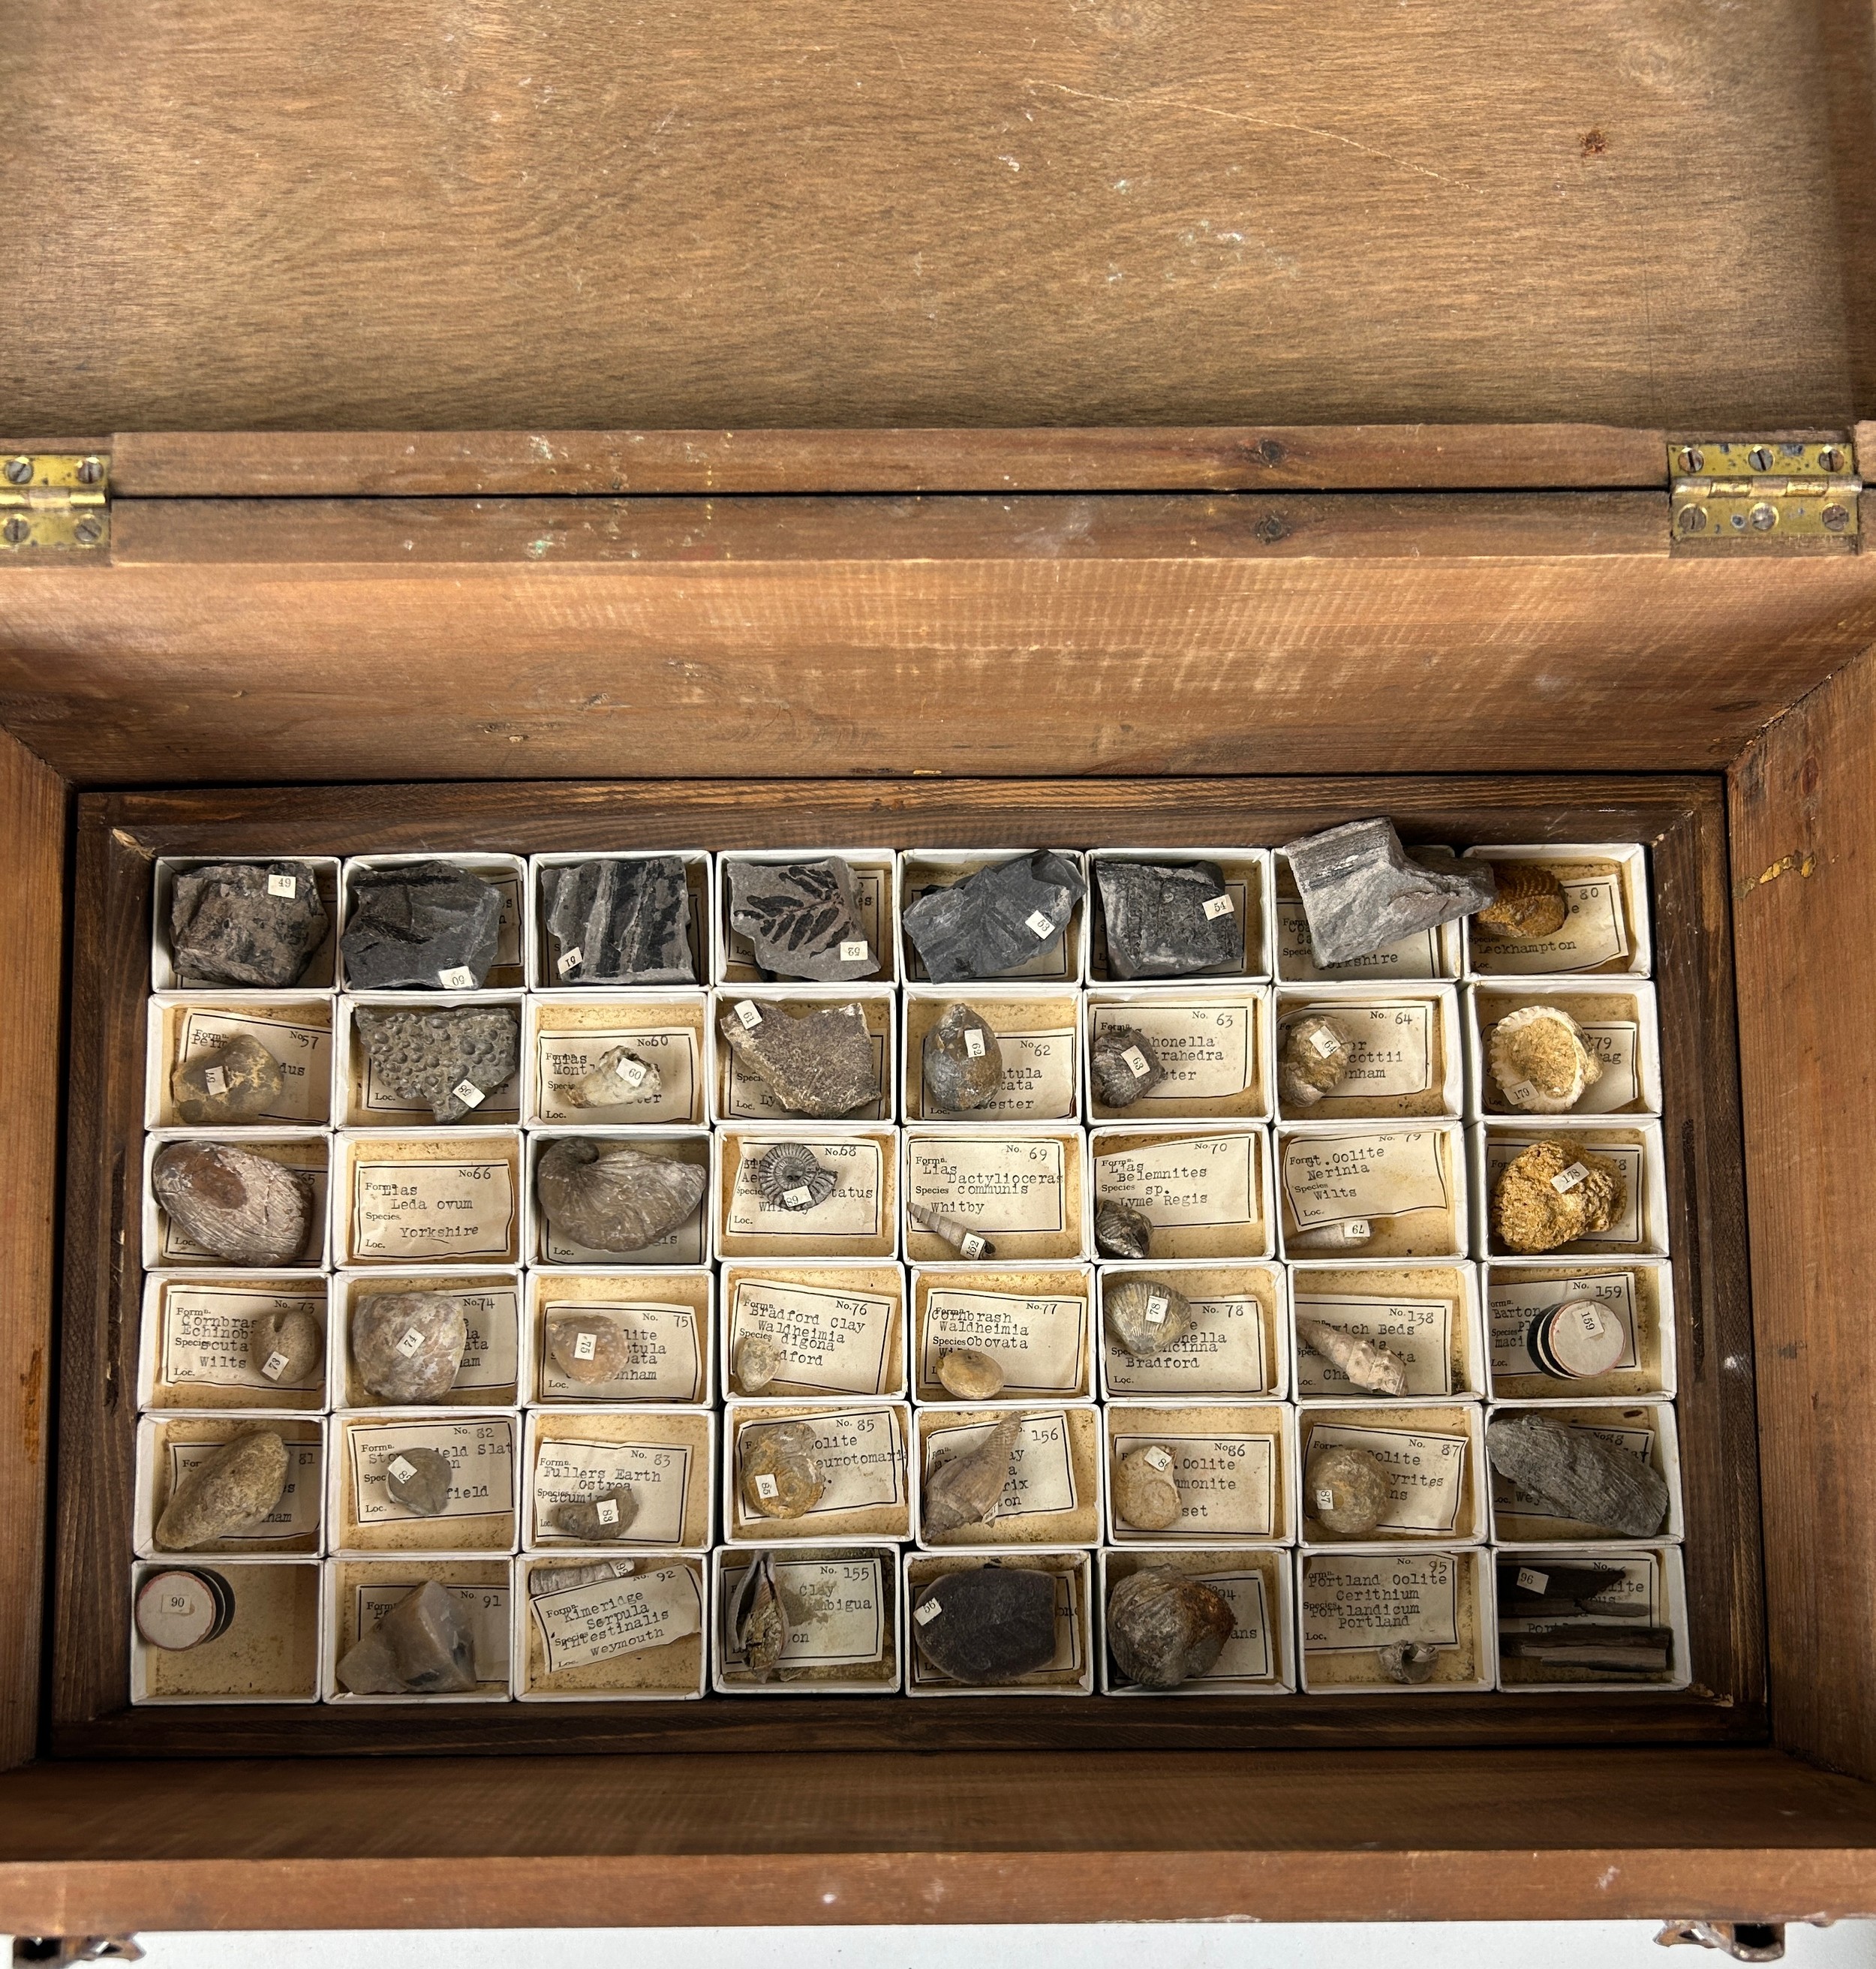 A GREGORY BOTTLEY CASED COLLECTION OF FOSSILS, Four wooden trays contained in a wooden box. - Image 4 of 12